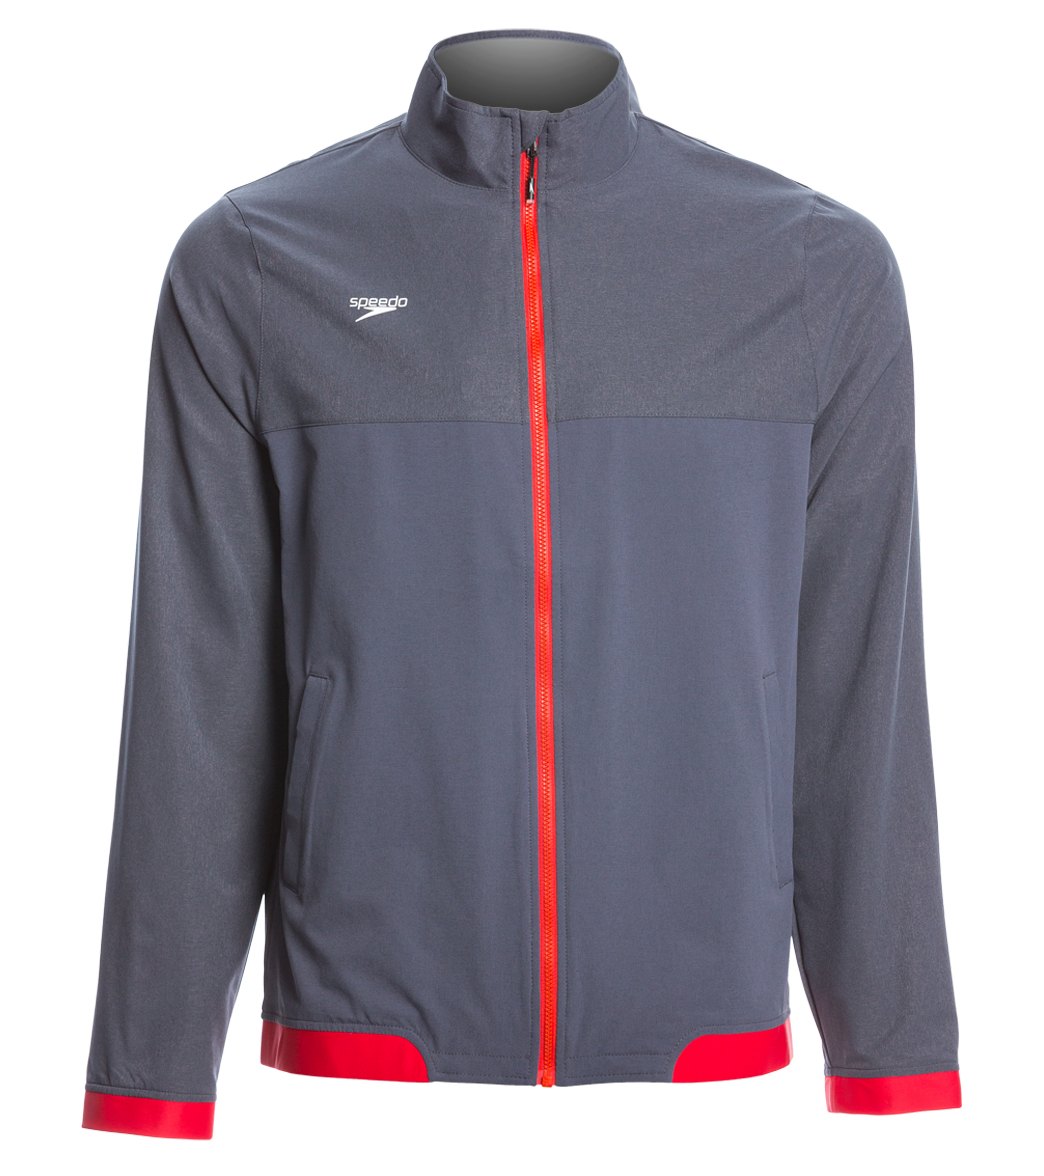 Speedo Men's Tech Warm Up Jacket at SwimOutlet.com - Free Shipping